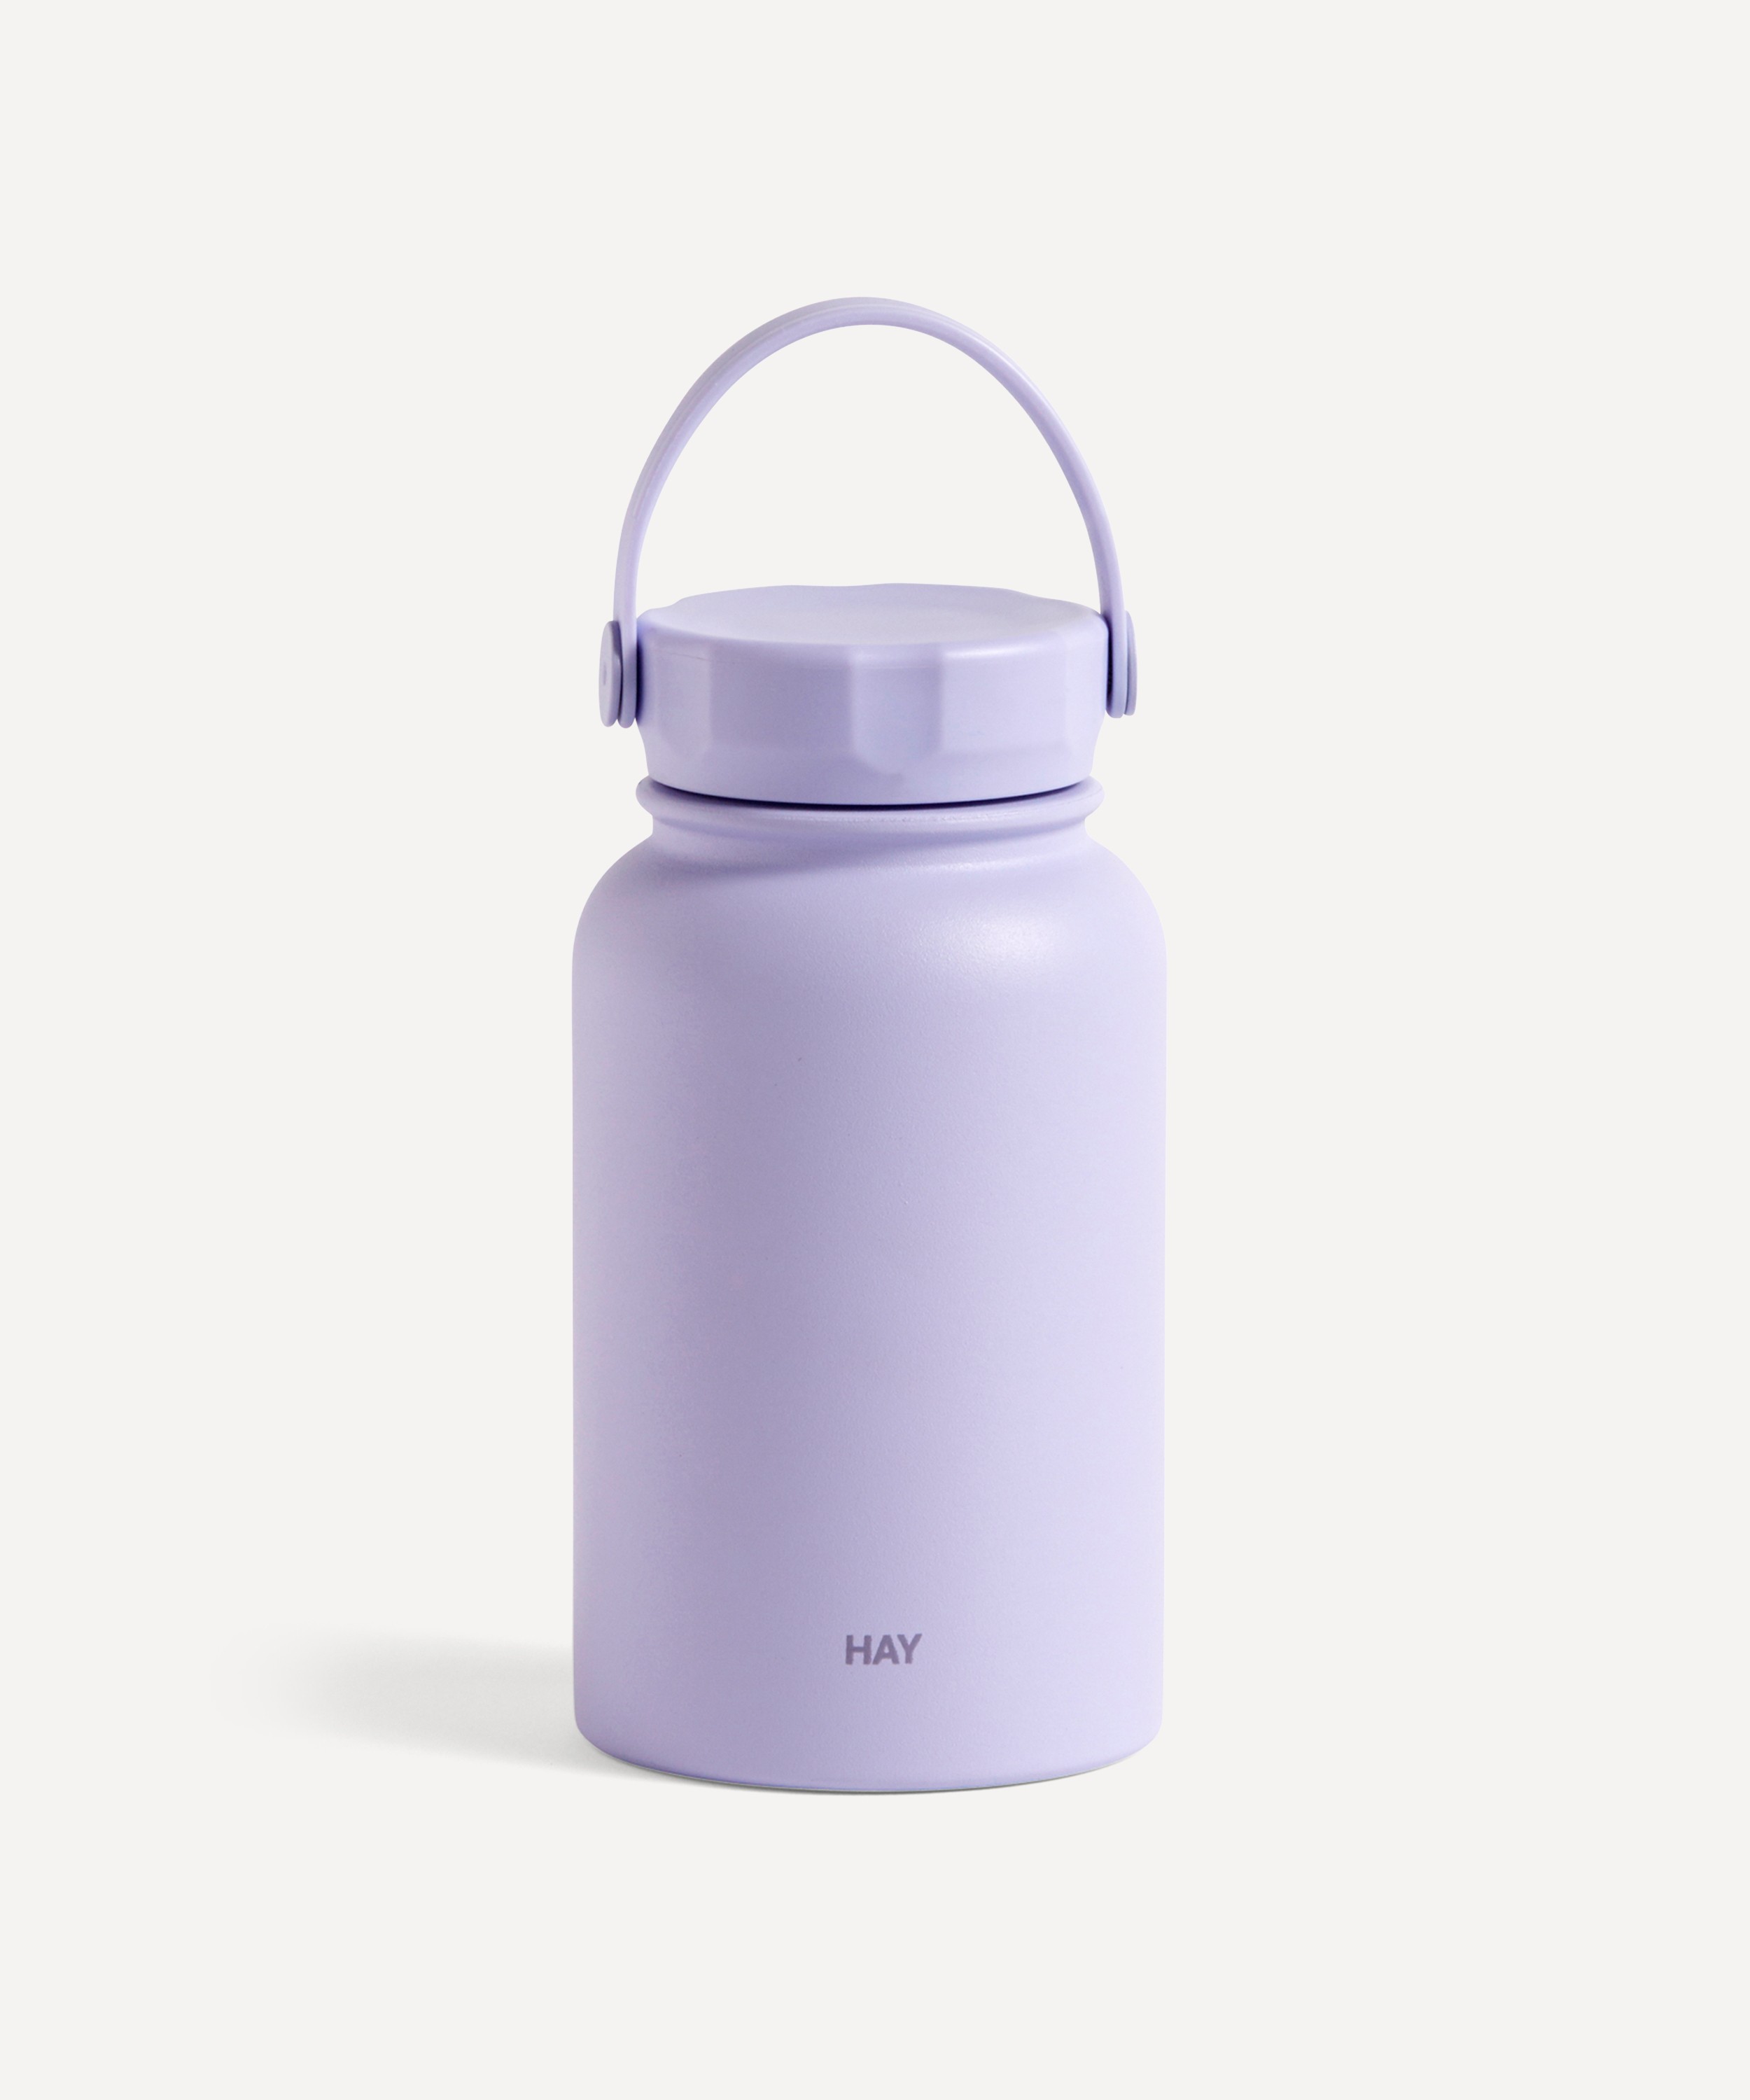 Hay - Small Mono Thermal Bottle 600ml